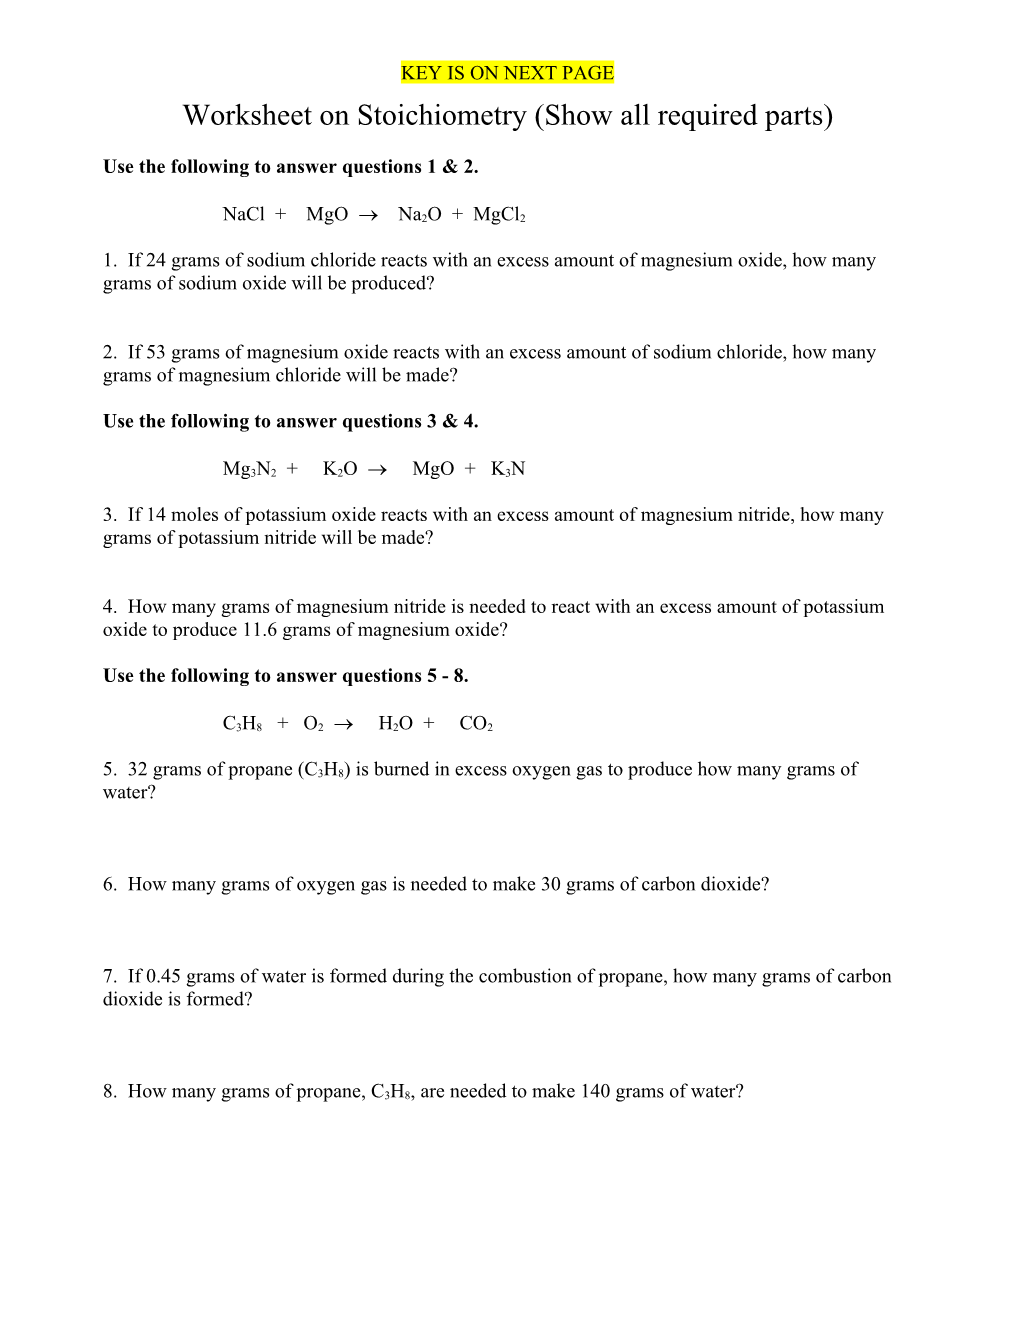 Worksheet on Stoichiometry (Show All Required Parts)